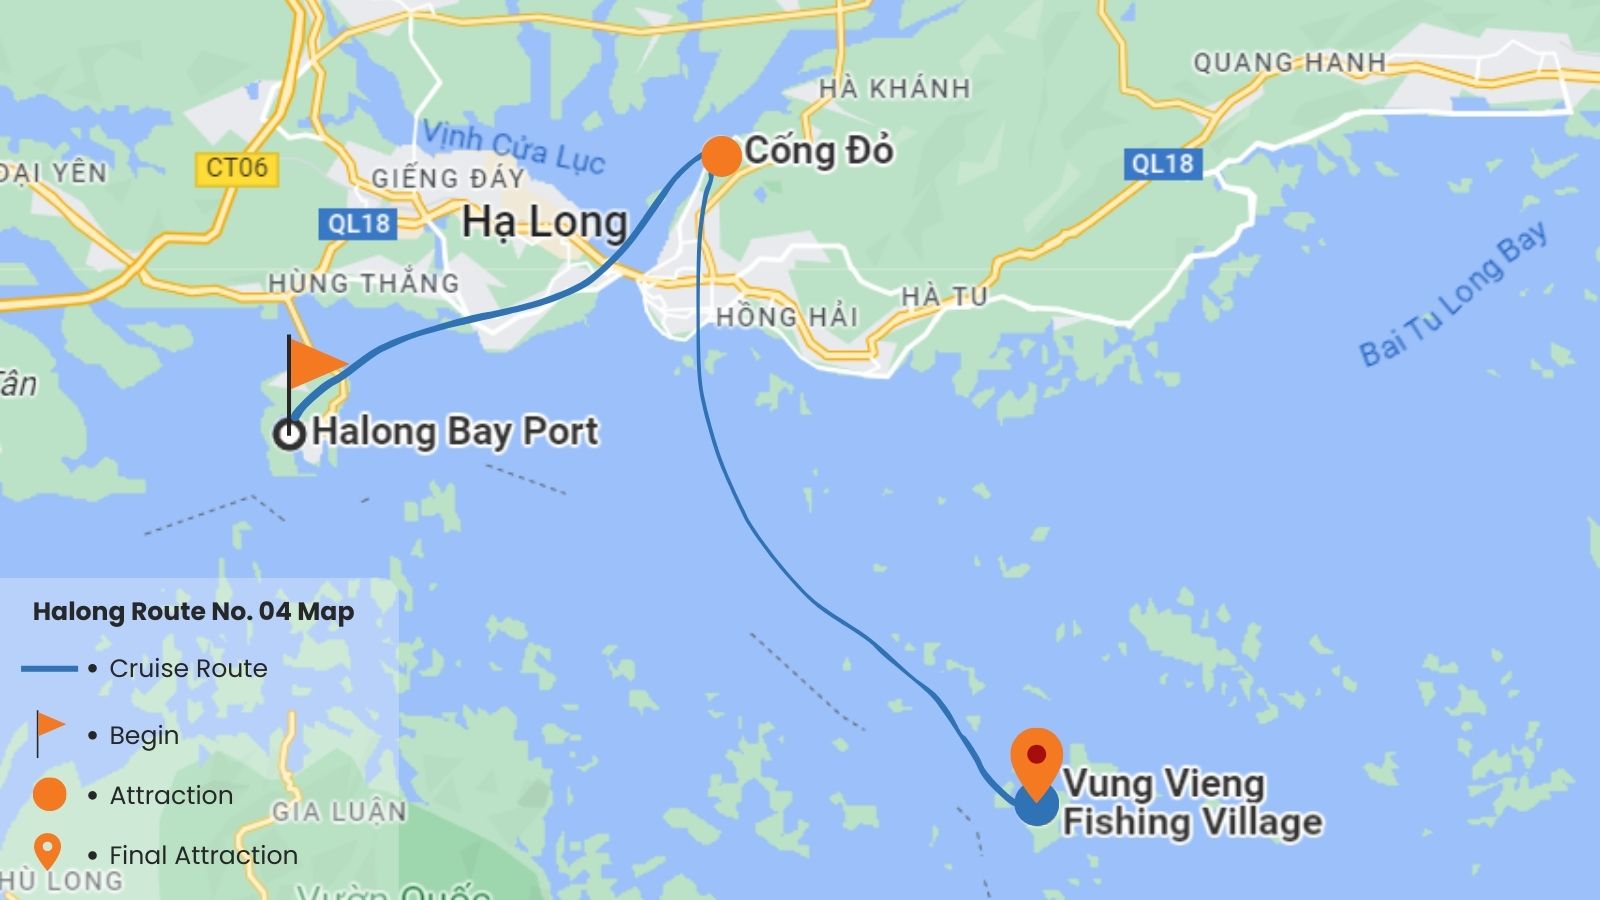 Halong Bay Route 4 Cruise Map